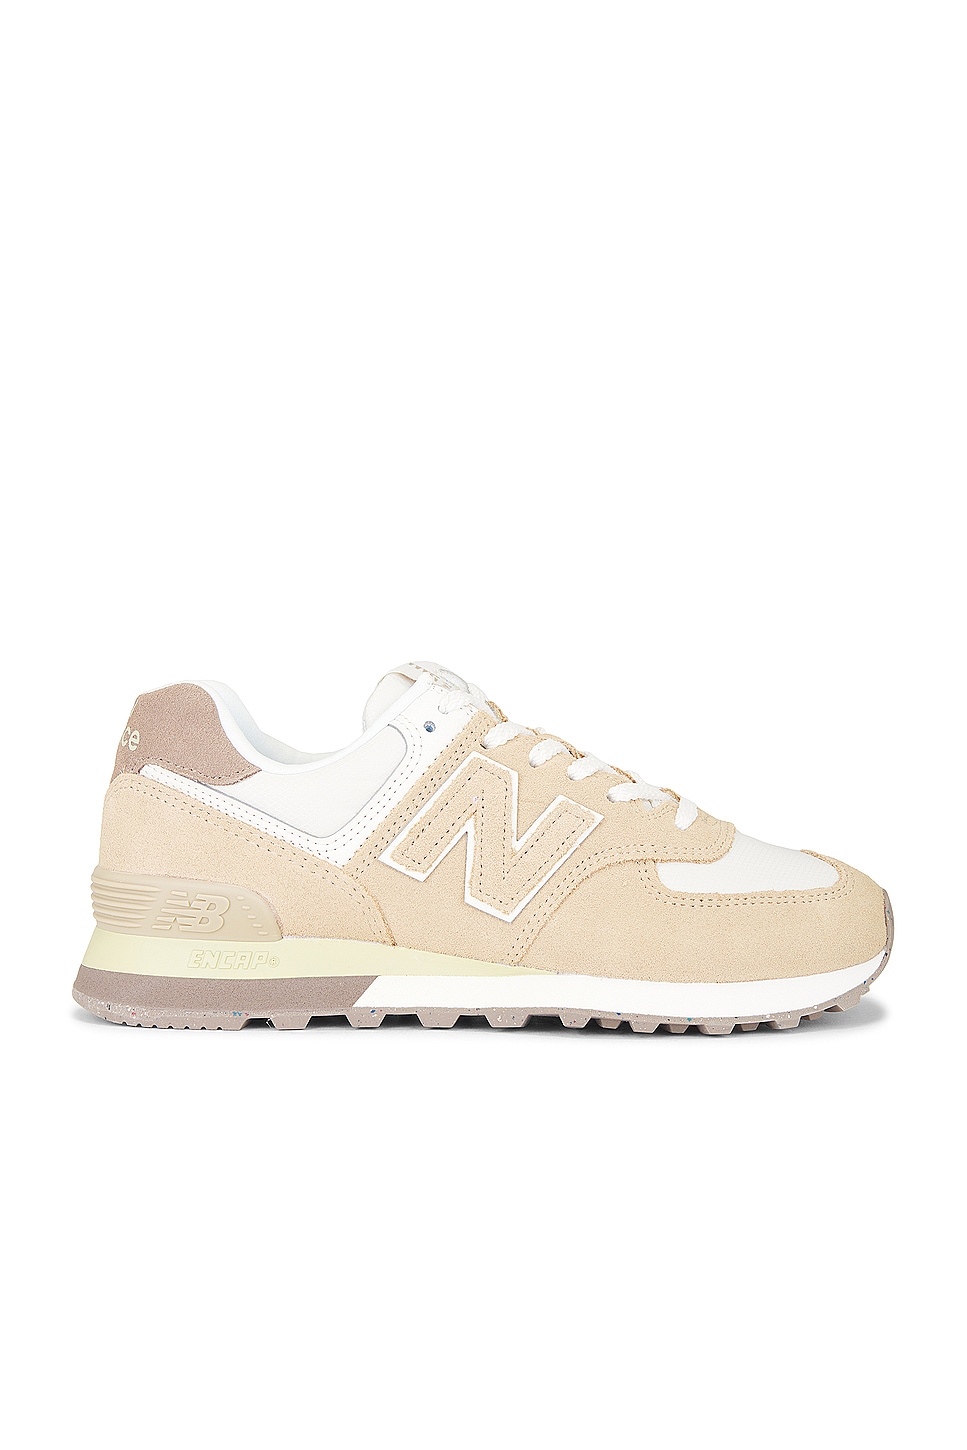 Image 1 of New Balance 574 Sneakers in Bone & White